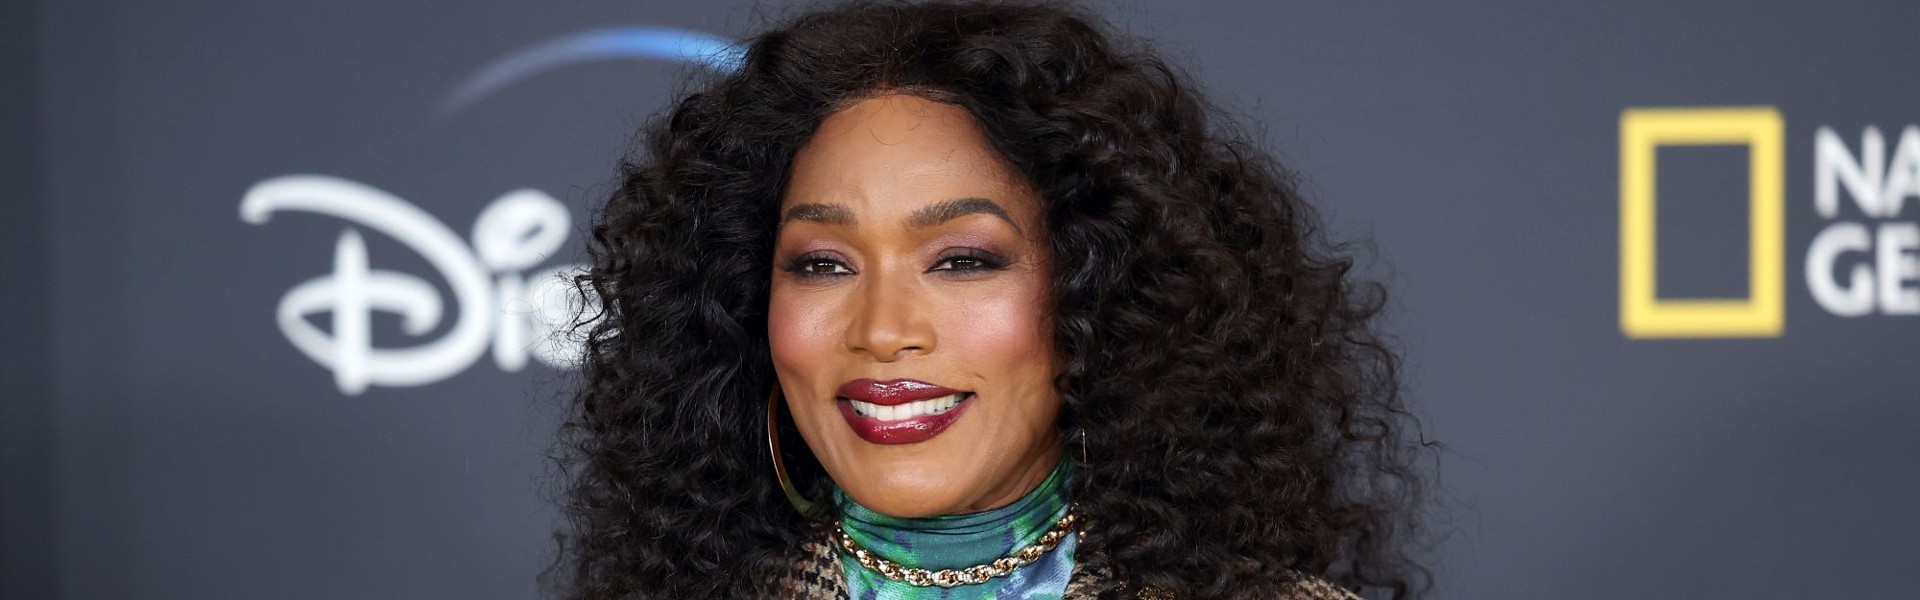 From the rain to under the eaves? Angela Bassett swaps MCU for Star Wars